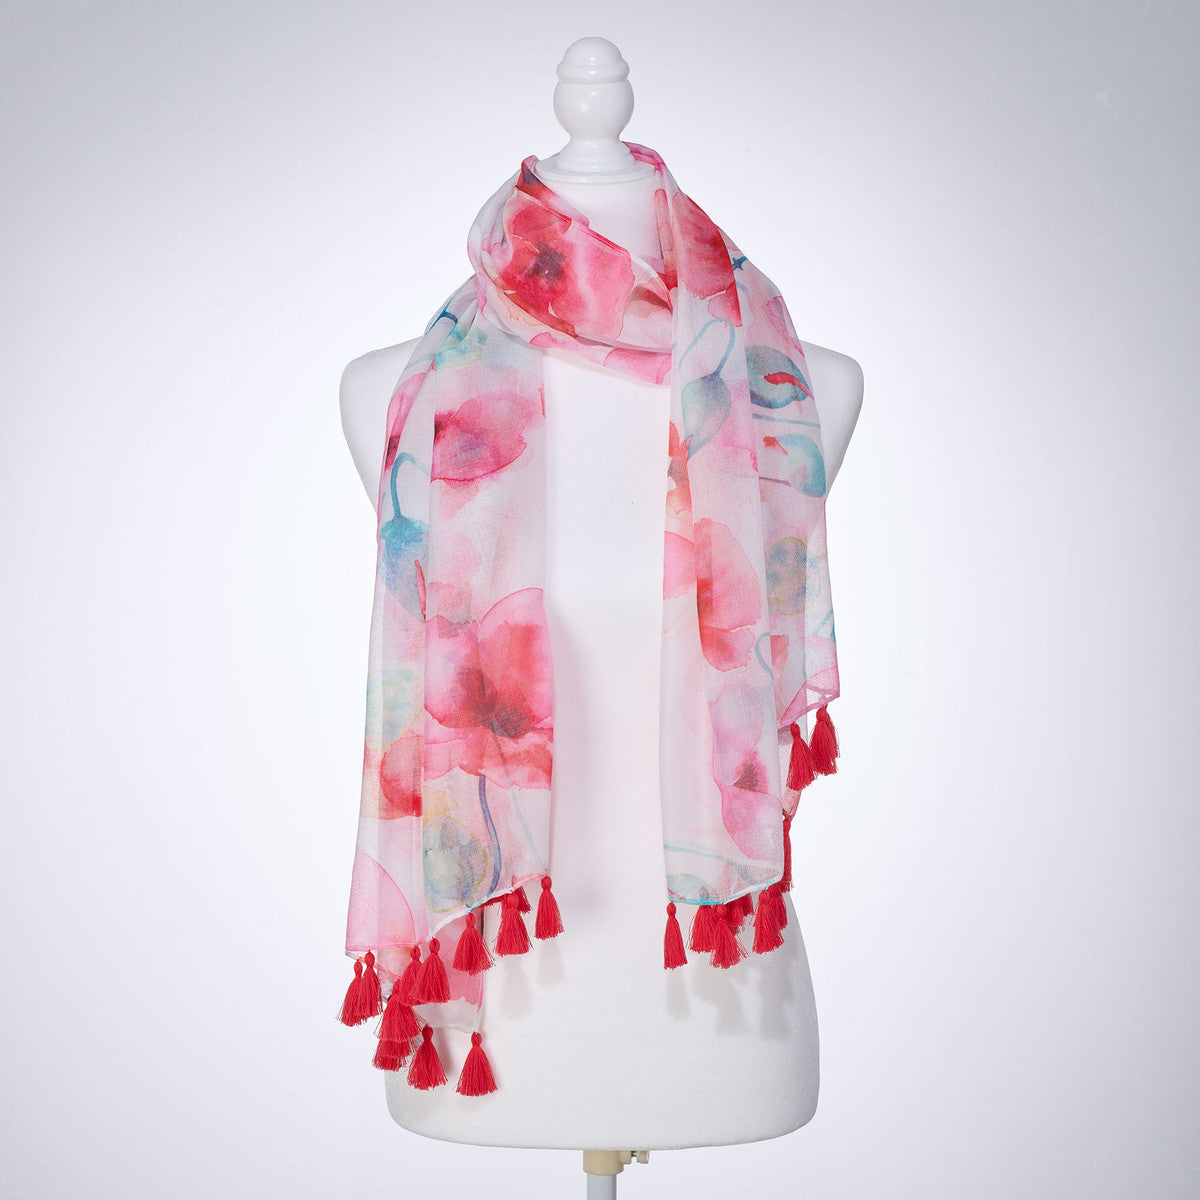 Cherish Every Moment Coral Poppies Scarf - The Christian Gift Company